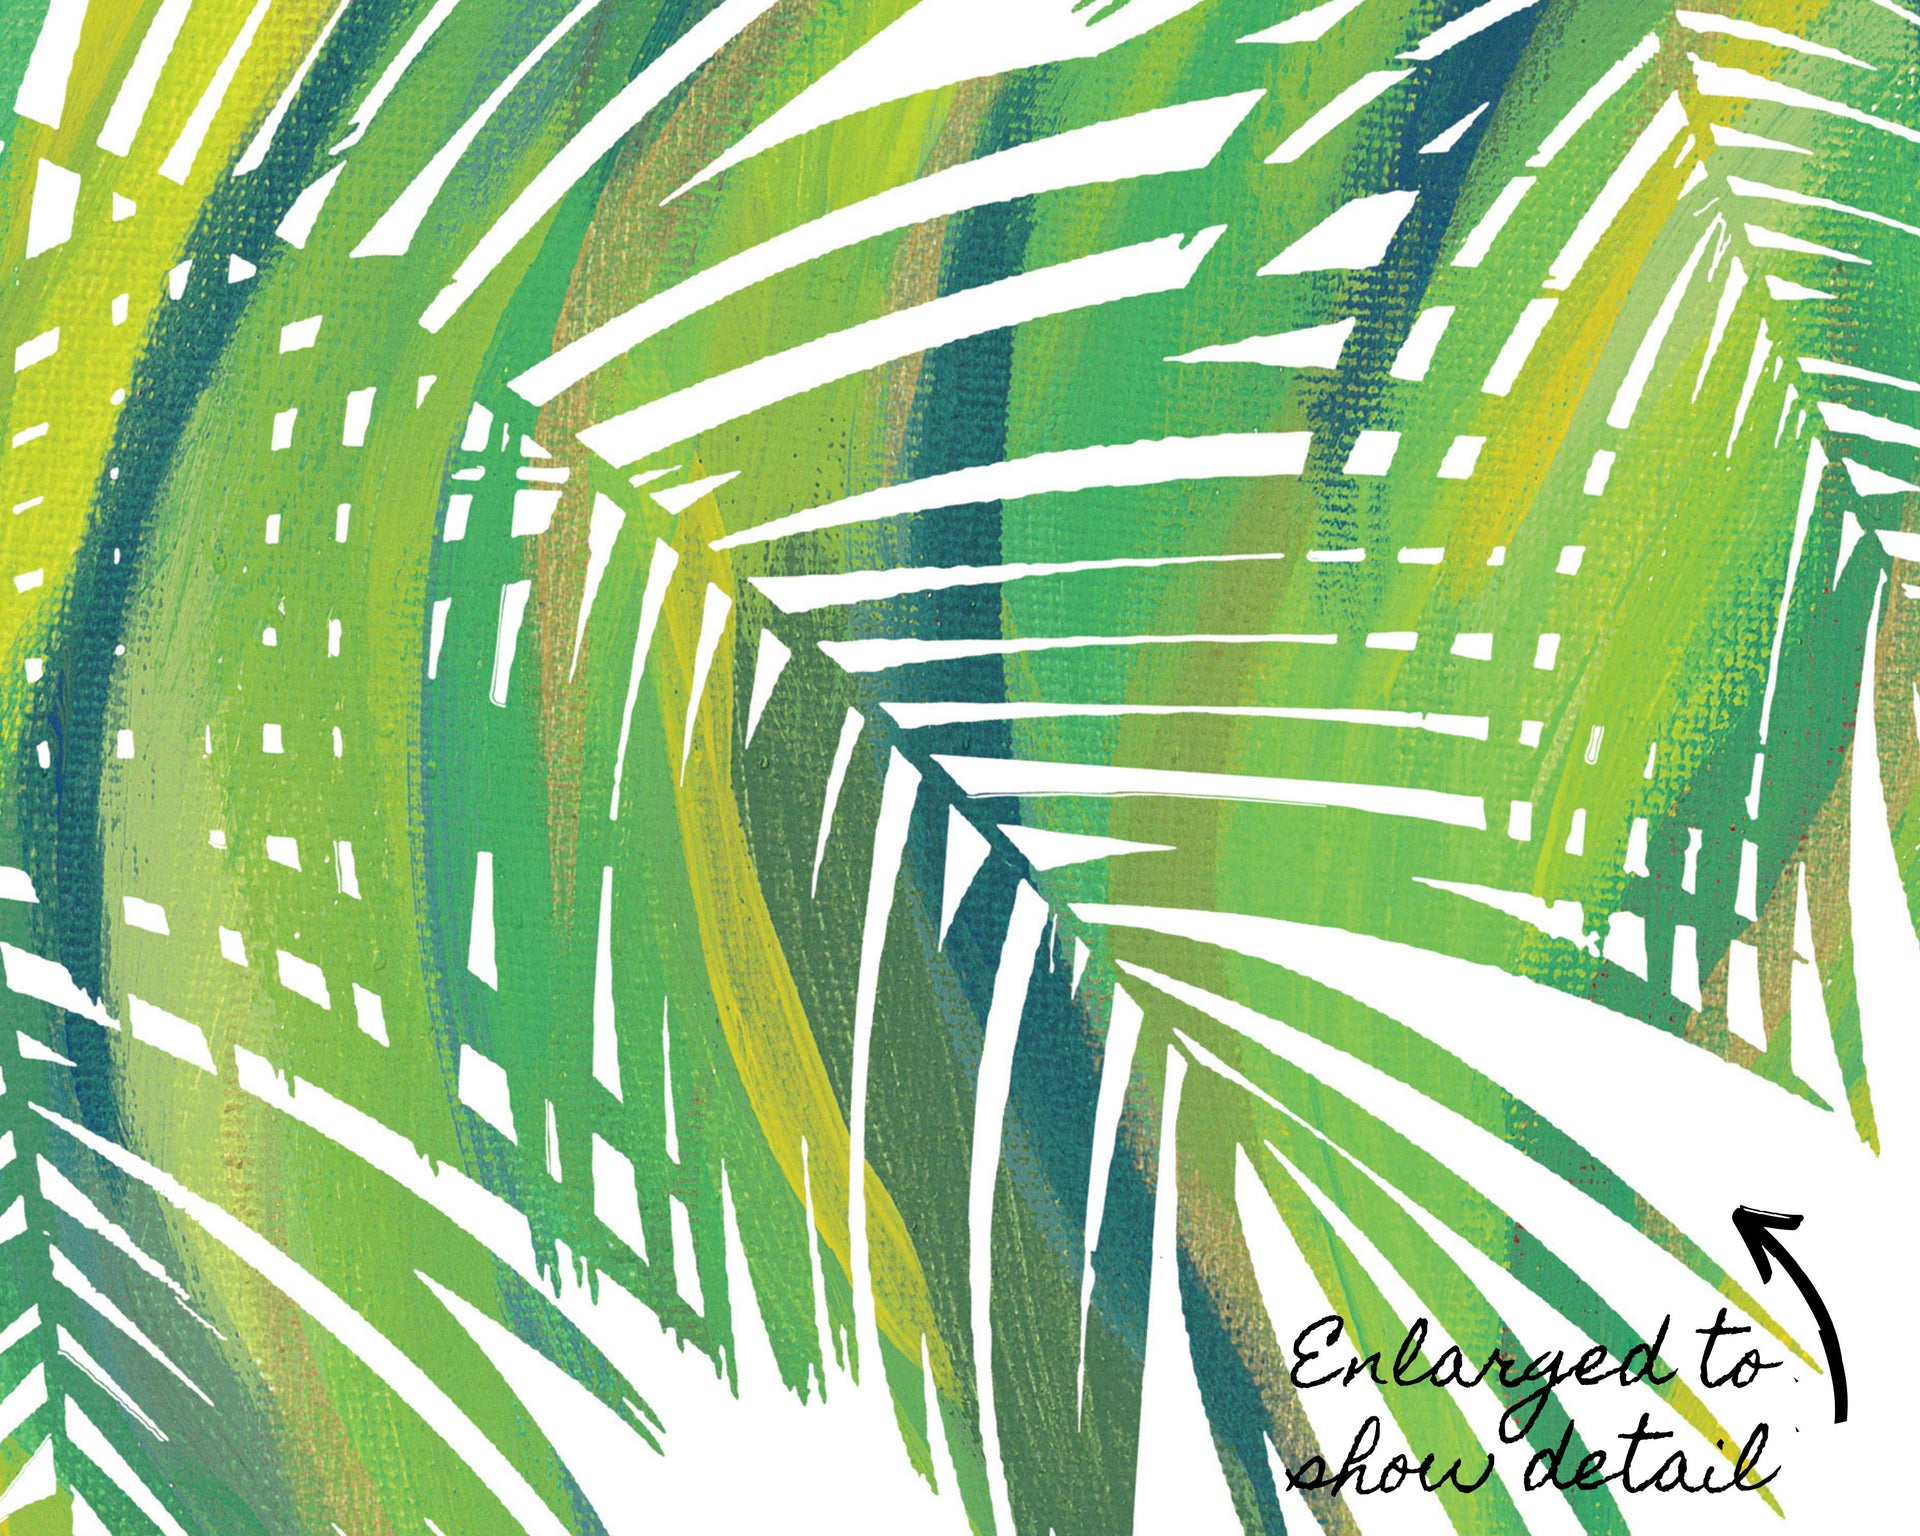 Tropical Palm Leaves Print Set  Detail Image by Gert & Co